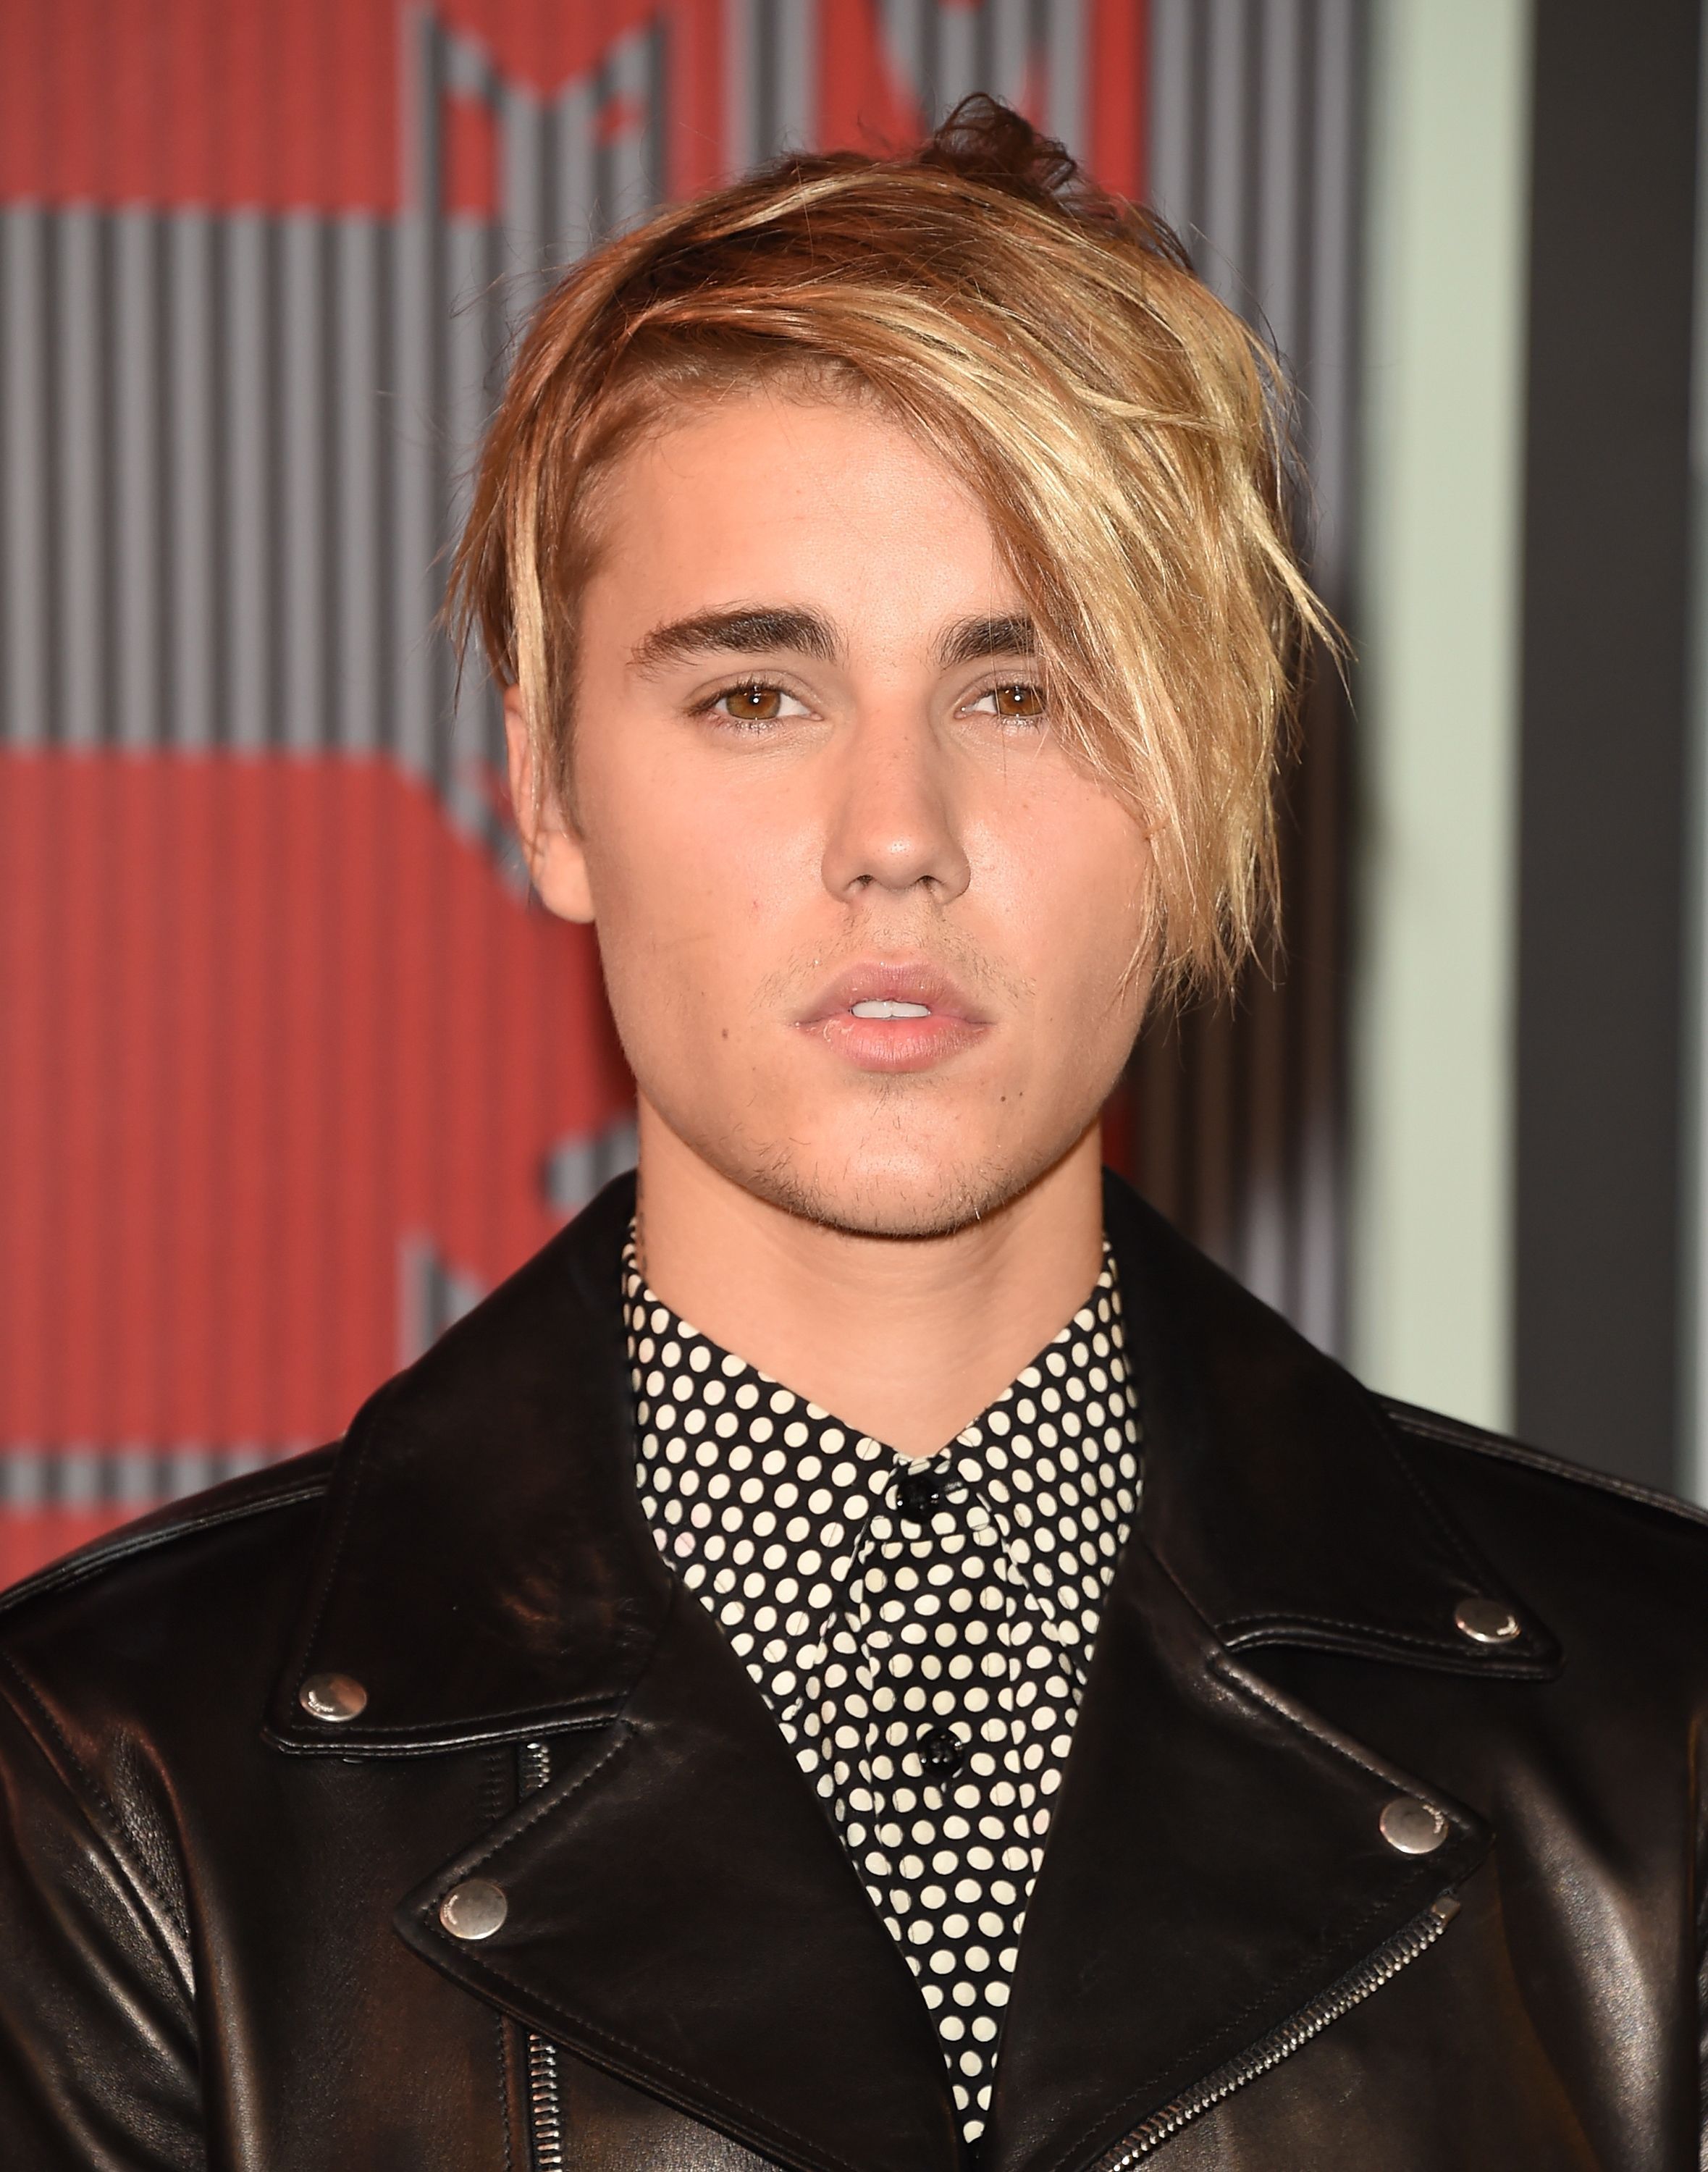 How Well Do You Know The Lyrics To “What Do You Mean” By Justin Bieber?. Justin bieber long hair, Justin bieber, Justin beiber hair